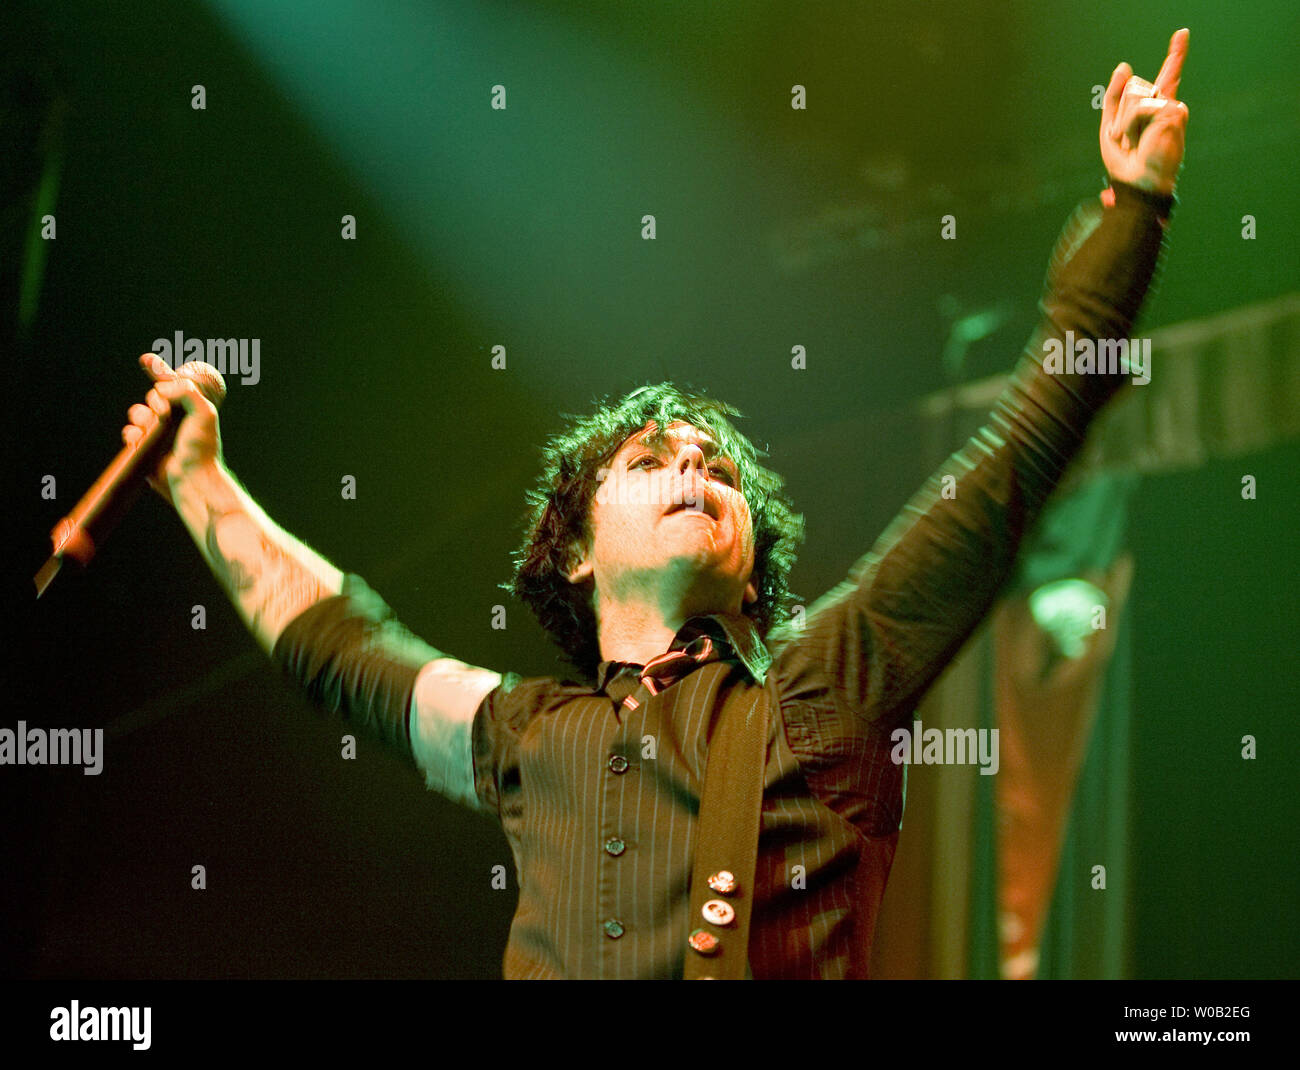 Lead singer Billie Joe Armstrong of the band Green Day performs at a sold out GM Place in Vancouver, British Columbia, September 27, 2005.  (UPI Photo/Heinz Ruckemann) Stock Photo